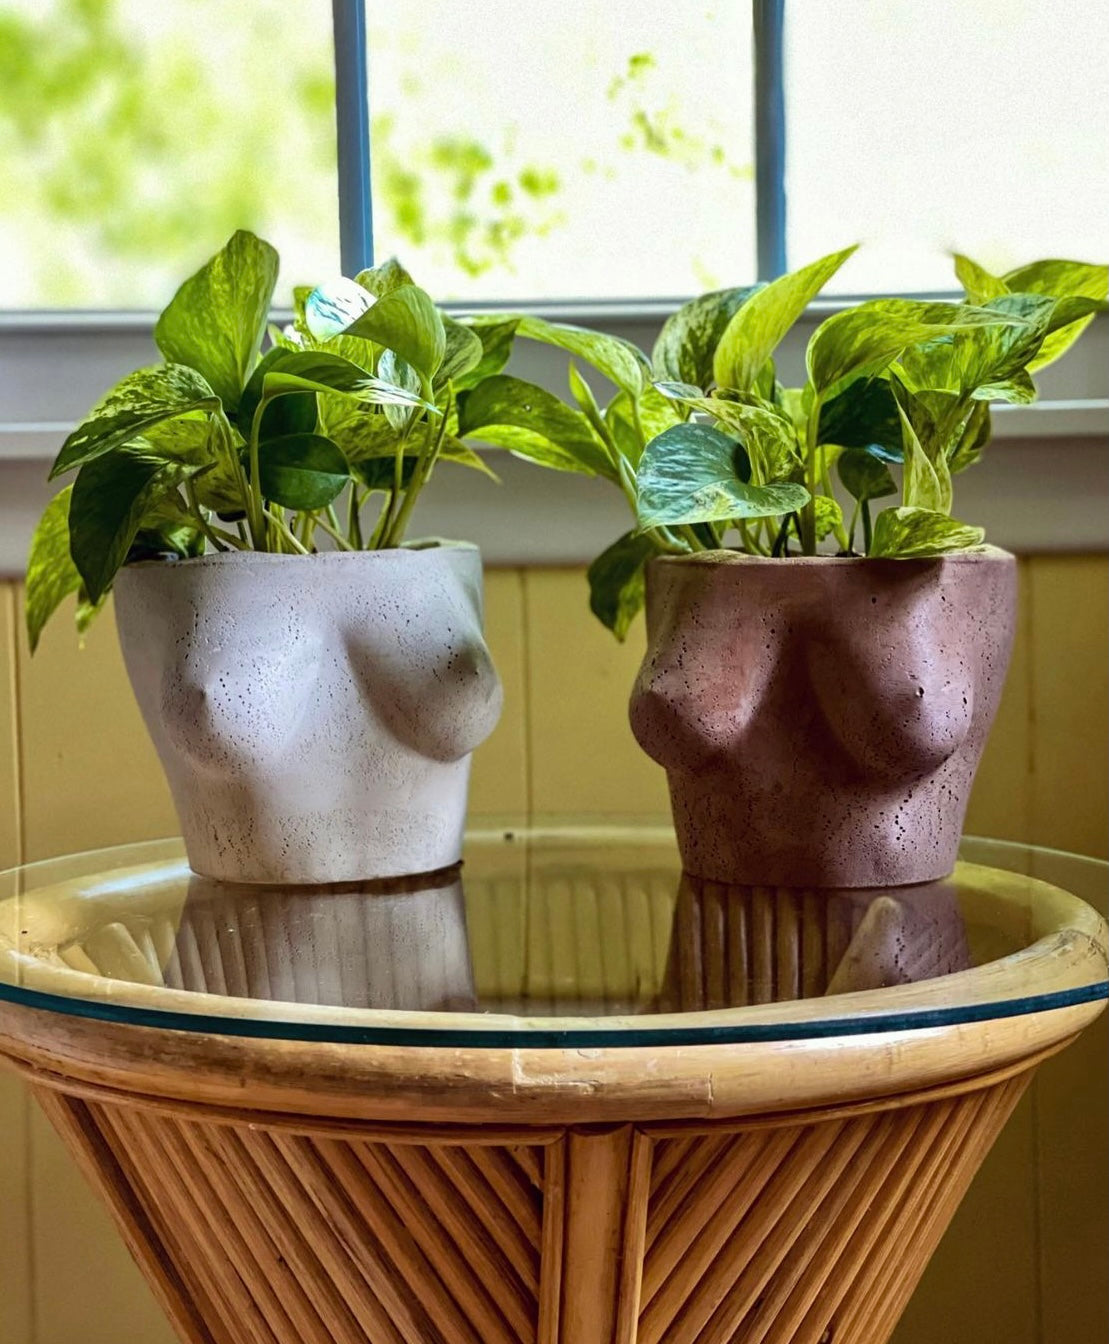 Two of Queen City ‘Crete’s “Milady” Bust planters sit on a table with pathos growing from them. 